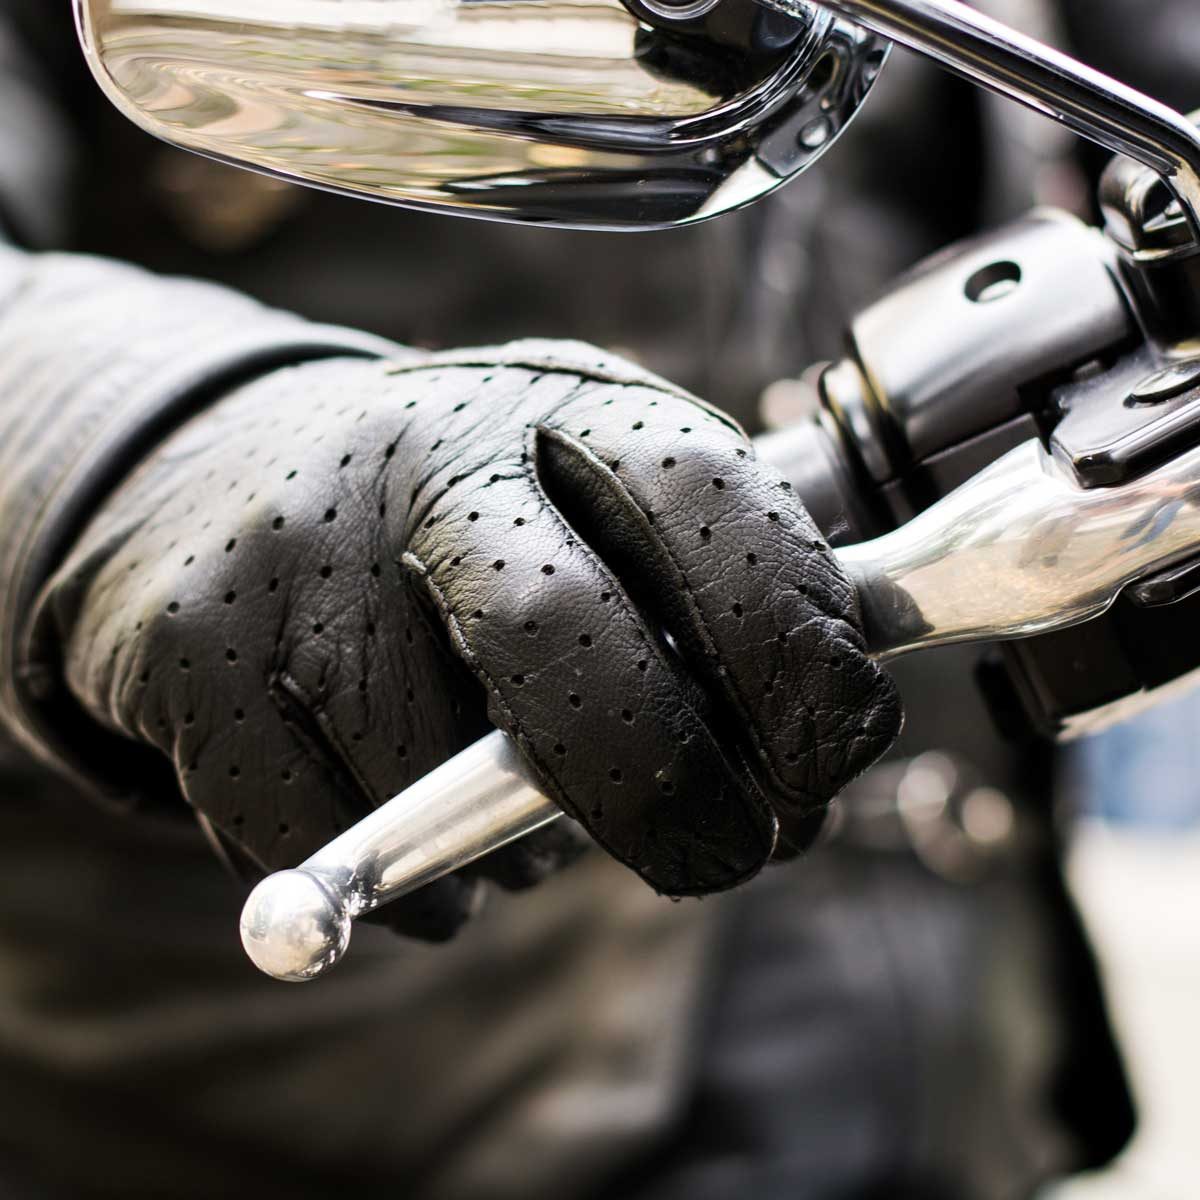 How Do Motorcycle Brakes Work? | The Family Handyman